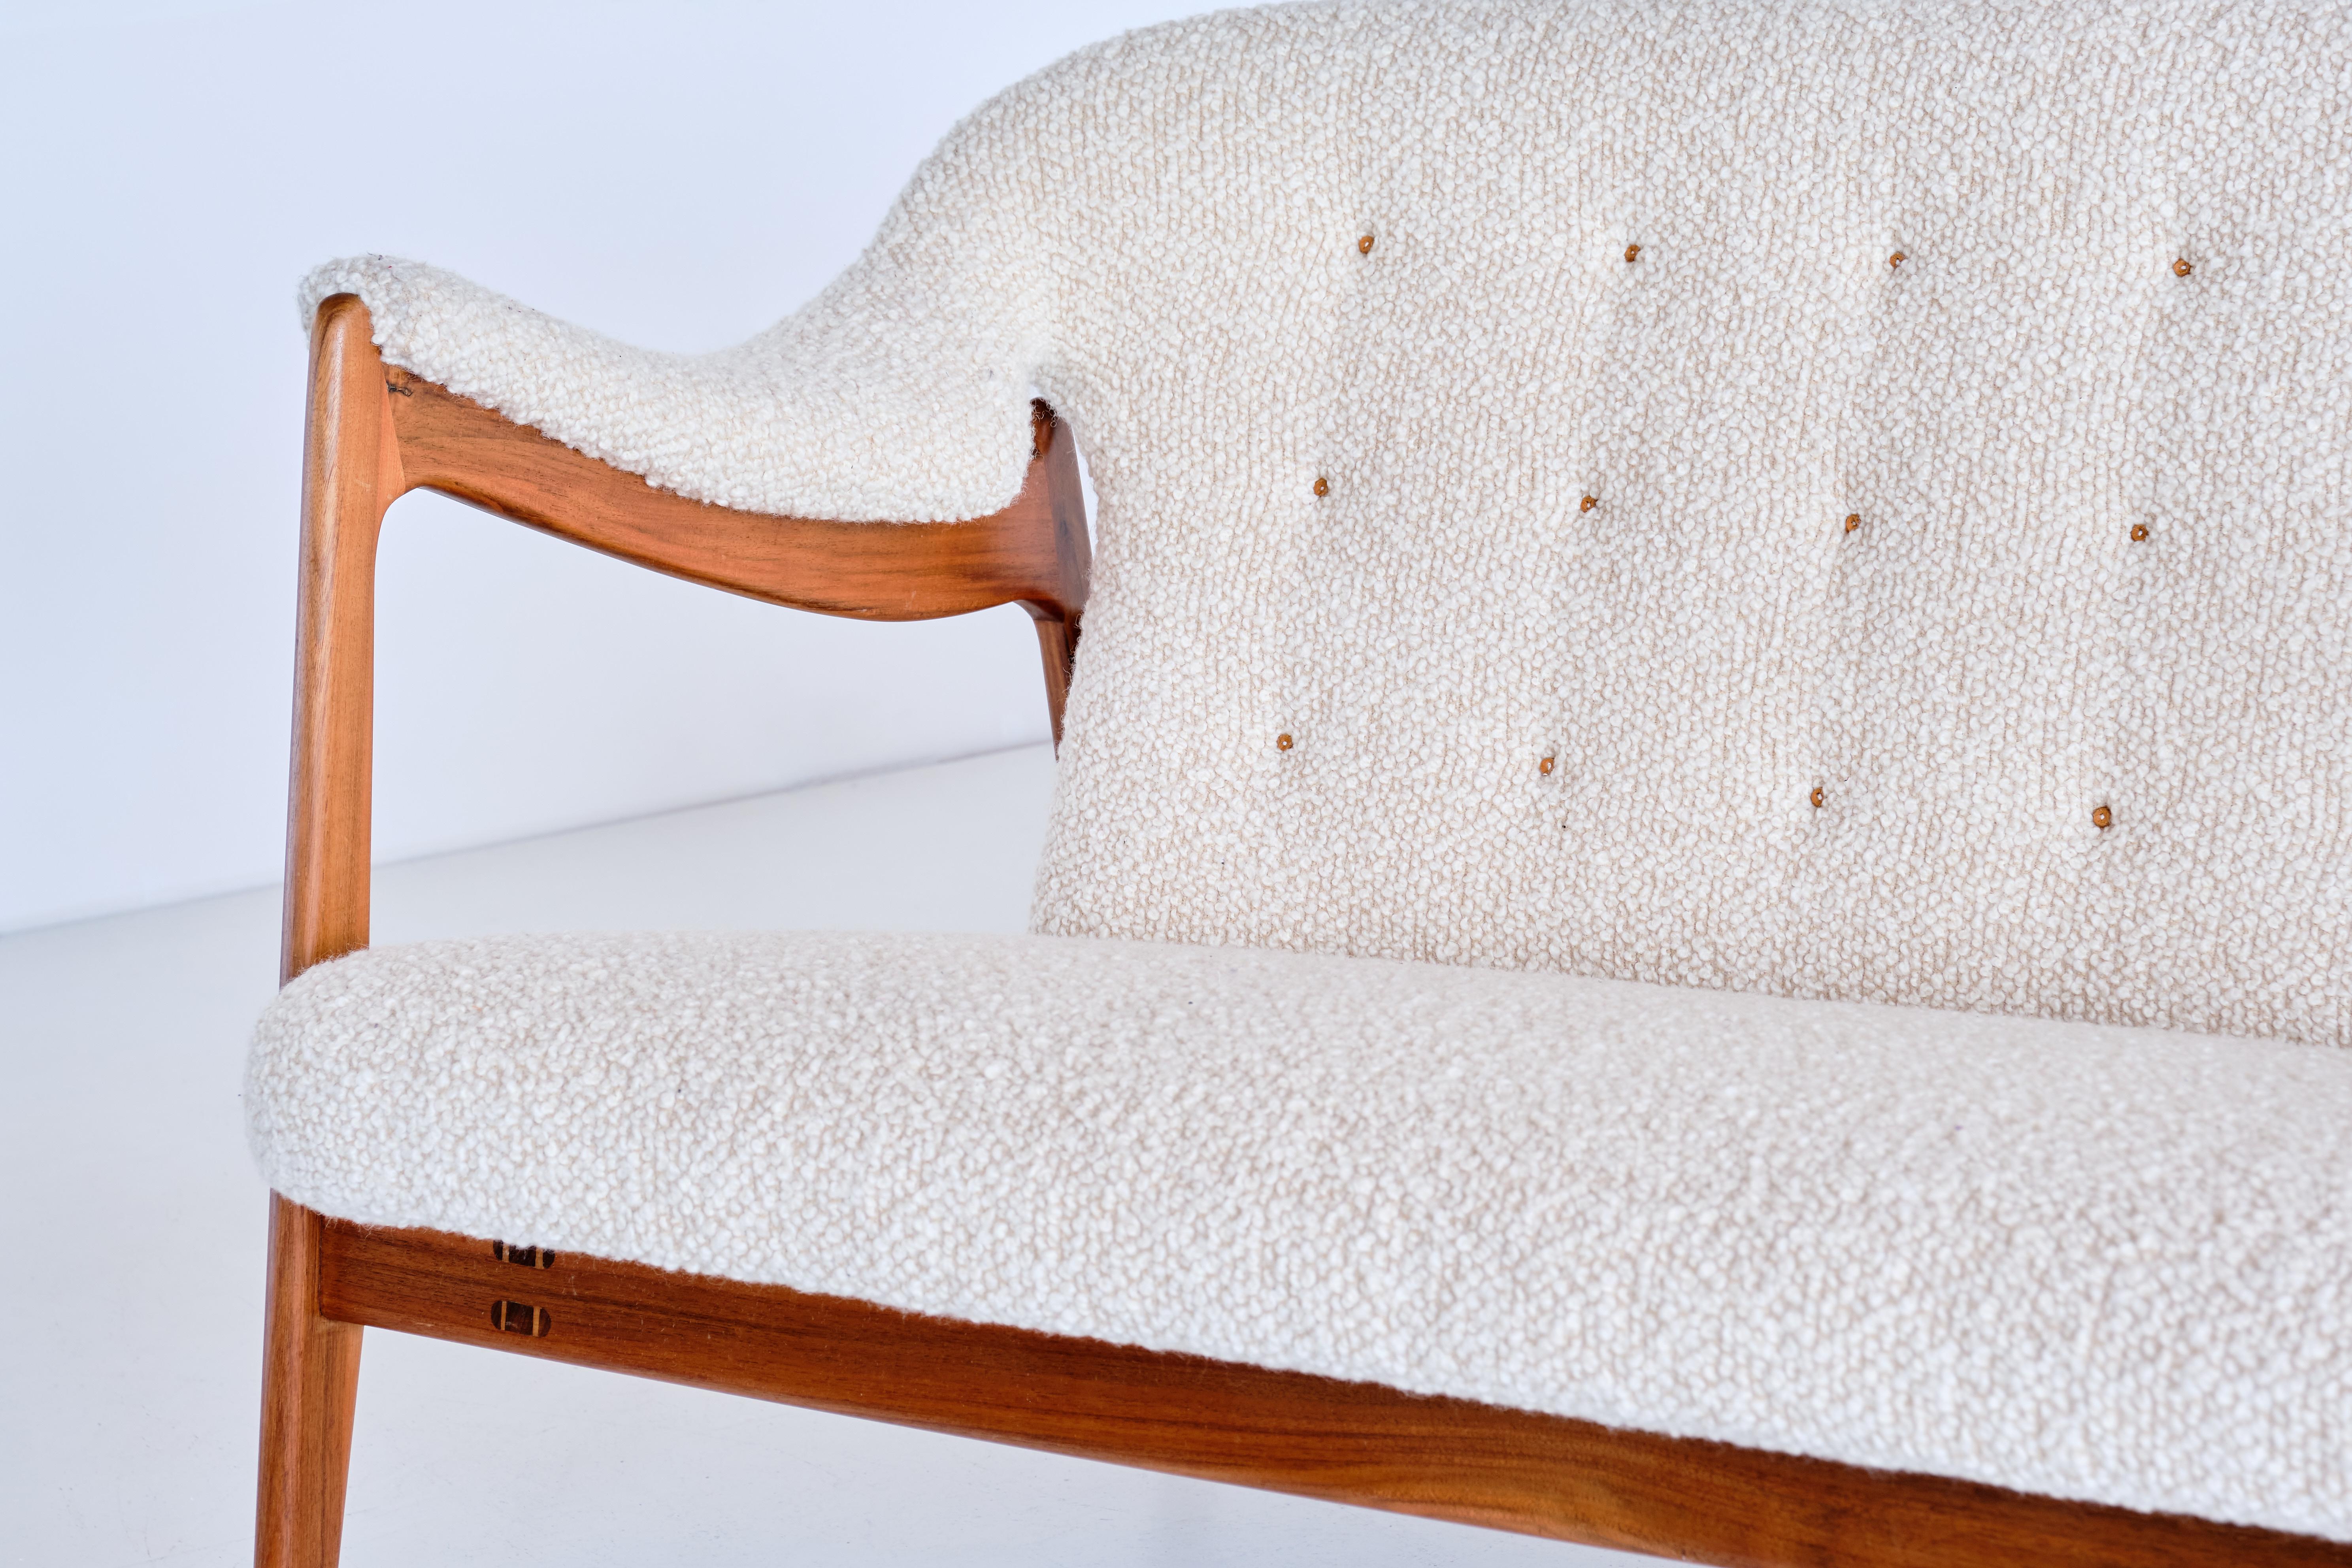 Important Brockmann Petersen Sofa in Nutwood and Bouclé, Louis G. Thiersen, 1951 For Sale 3